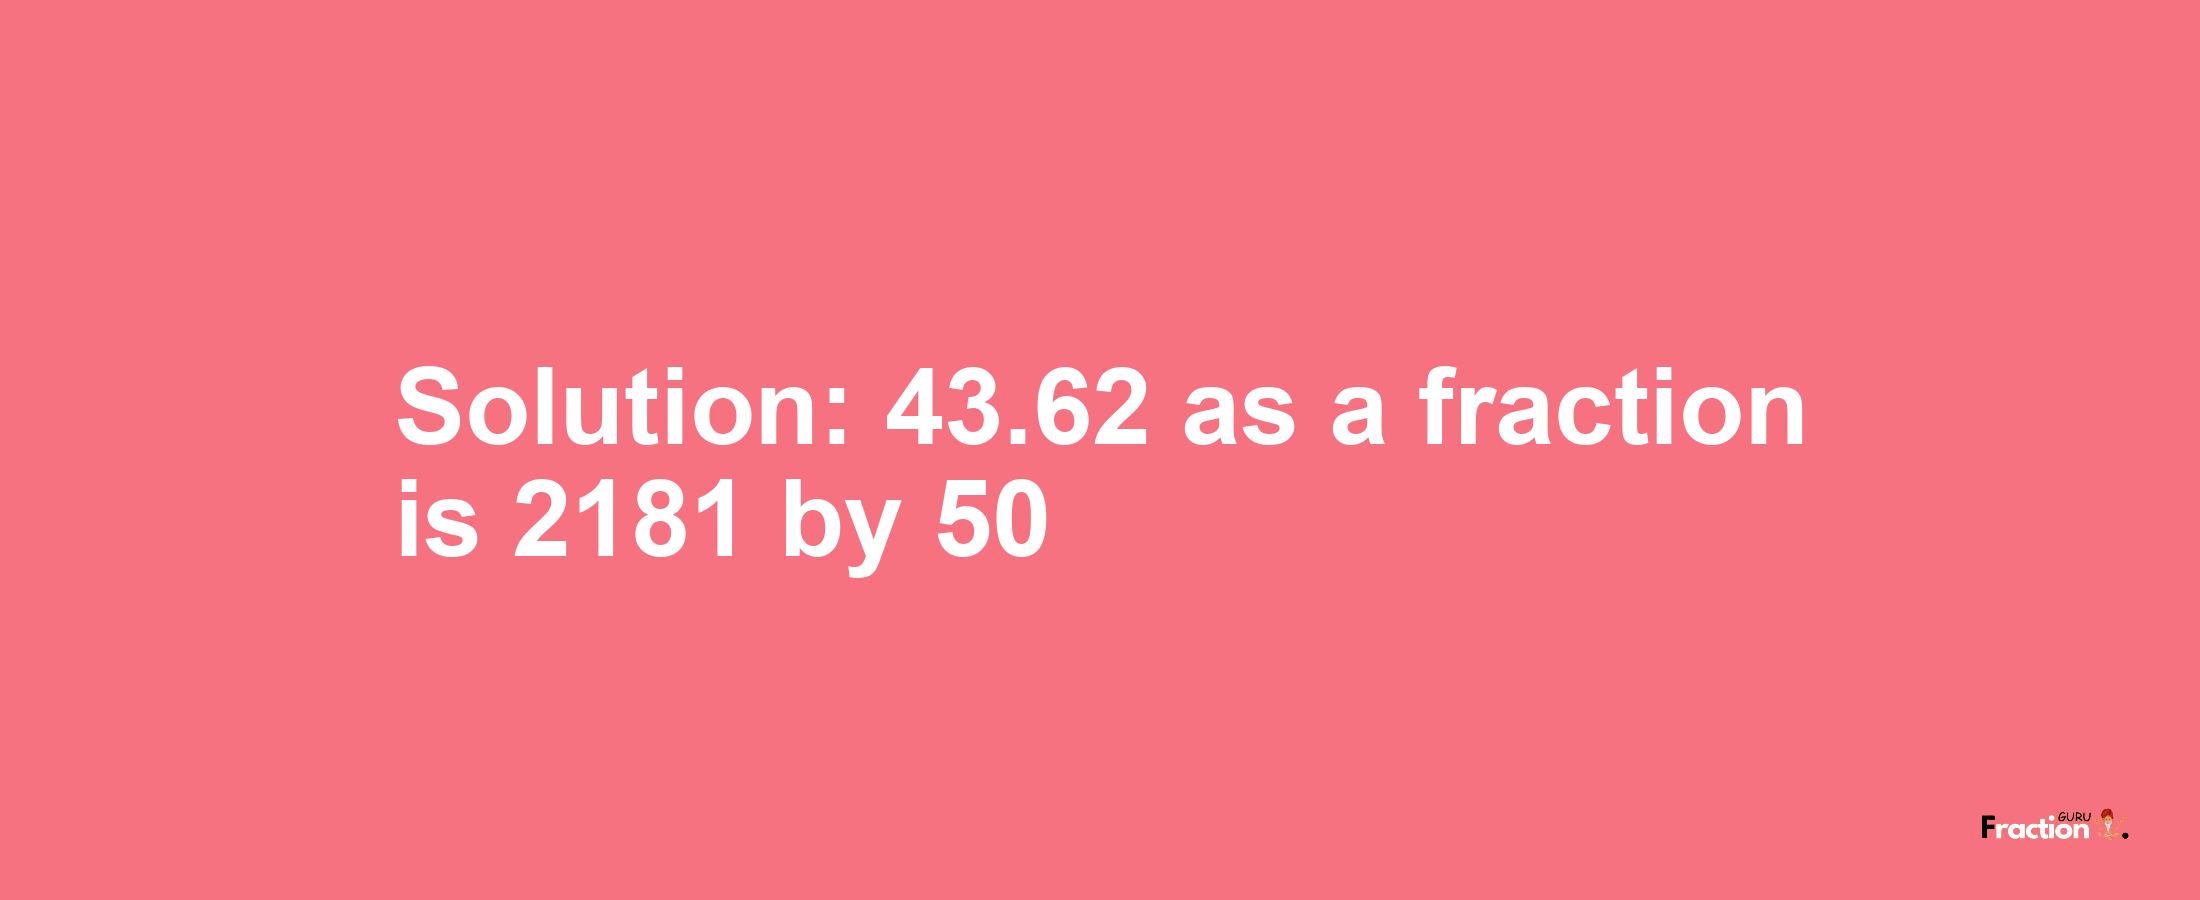 Solution:43.62 as a fraction is 2181/50